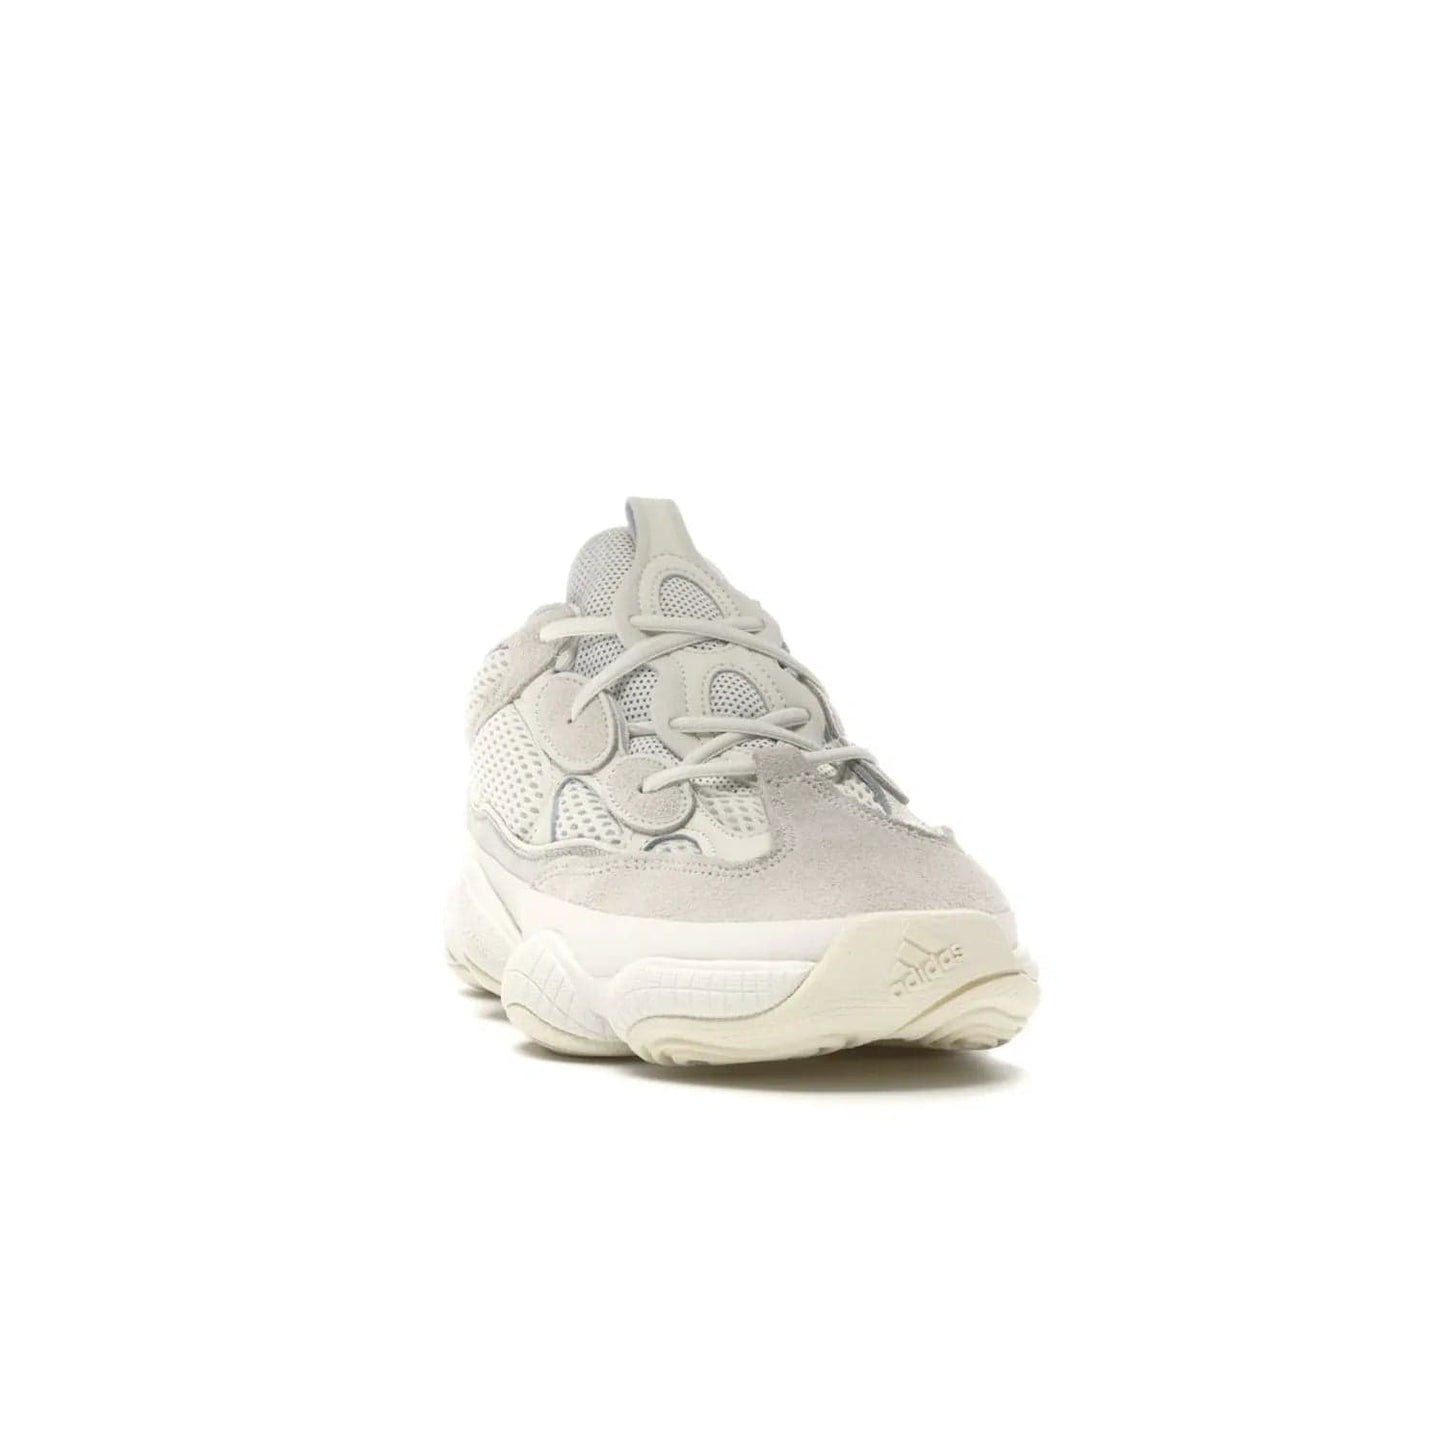 adidas Yeezy 500 Bone White - Image 8 - Only at www.BallersClubKickz.com - Classic look perfect for any sneaker collection. The adidas Yeezy 500 "Bone White" blends a white mesh upper with suede overlays & a chunky midsole inspired by the Adidas KB3. Complimented by a tonal-cream outsole, this timeless style is a must-have.